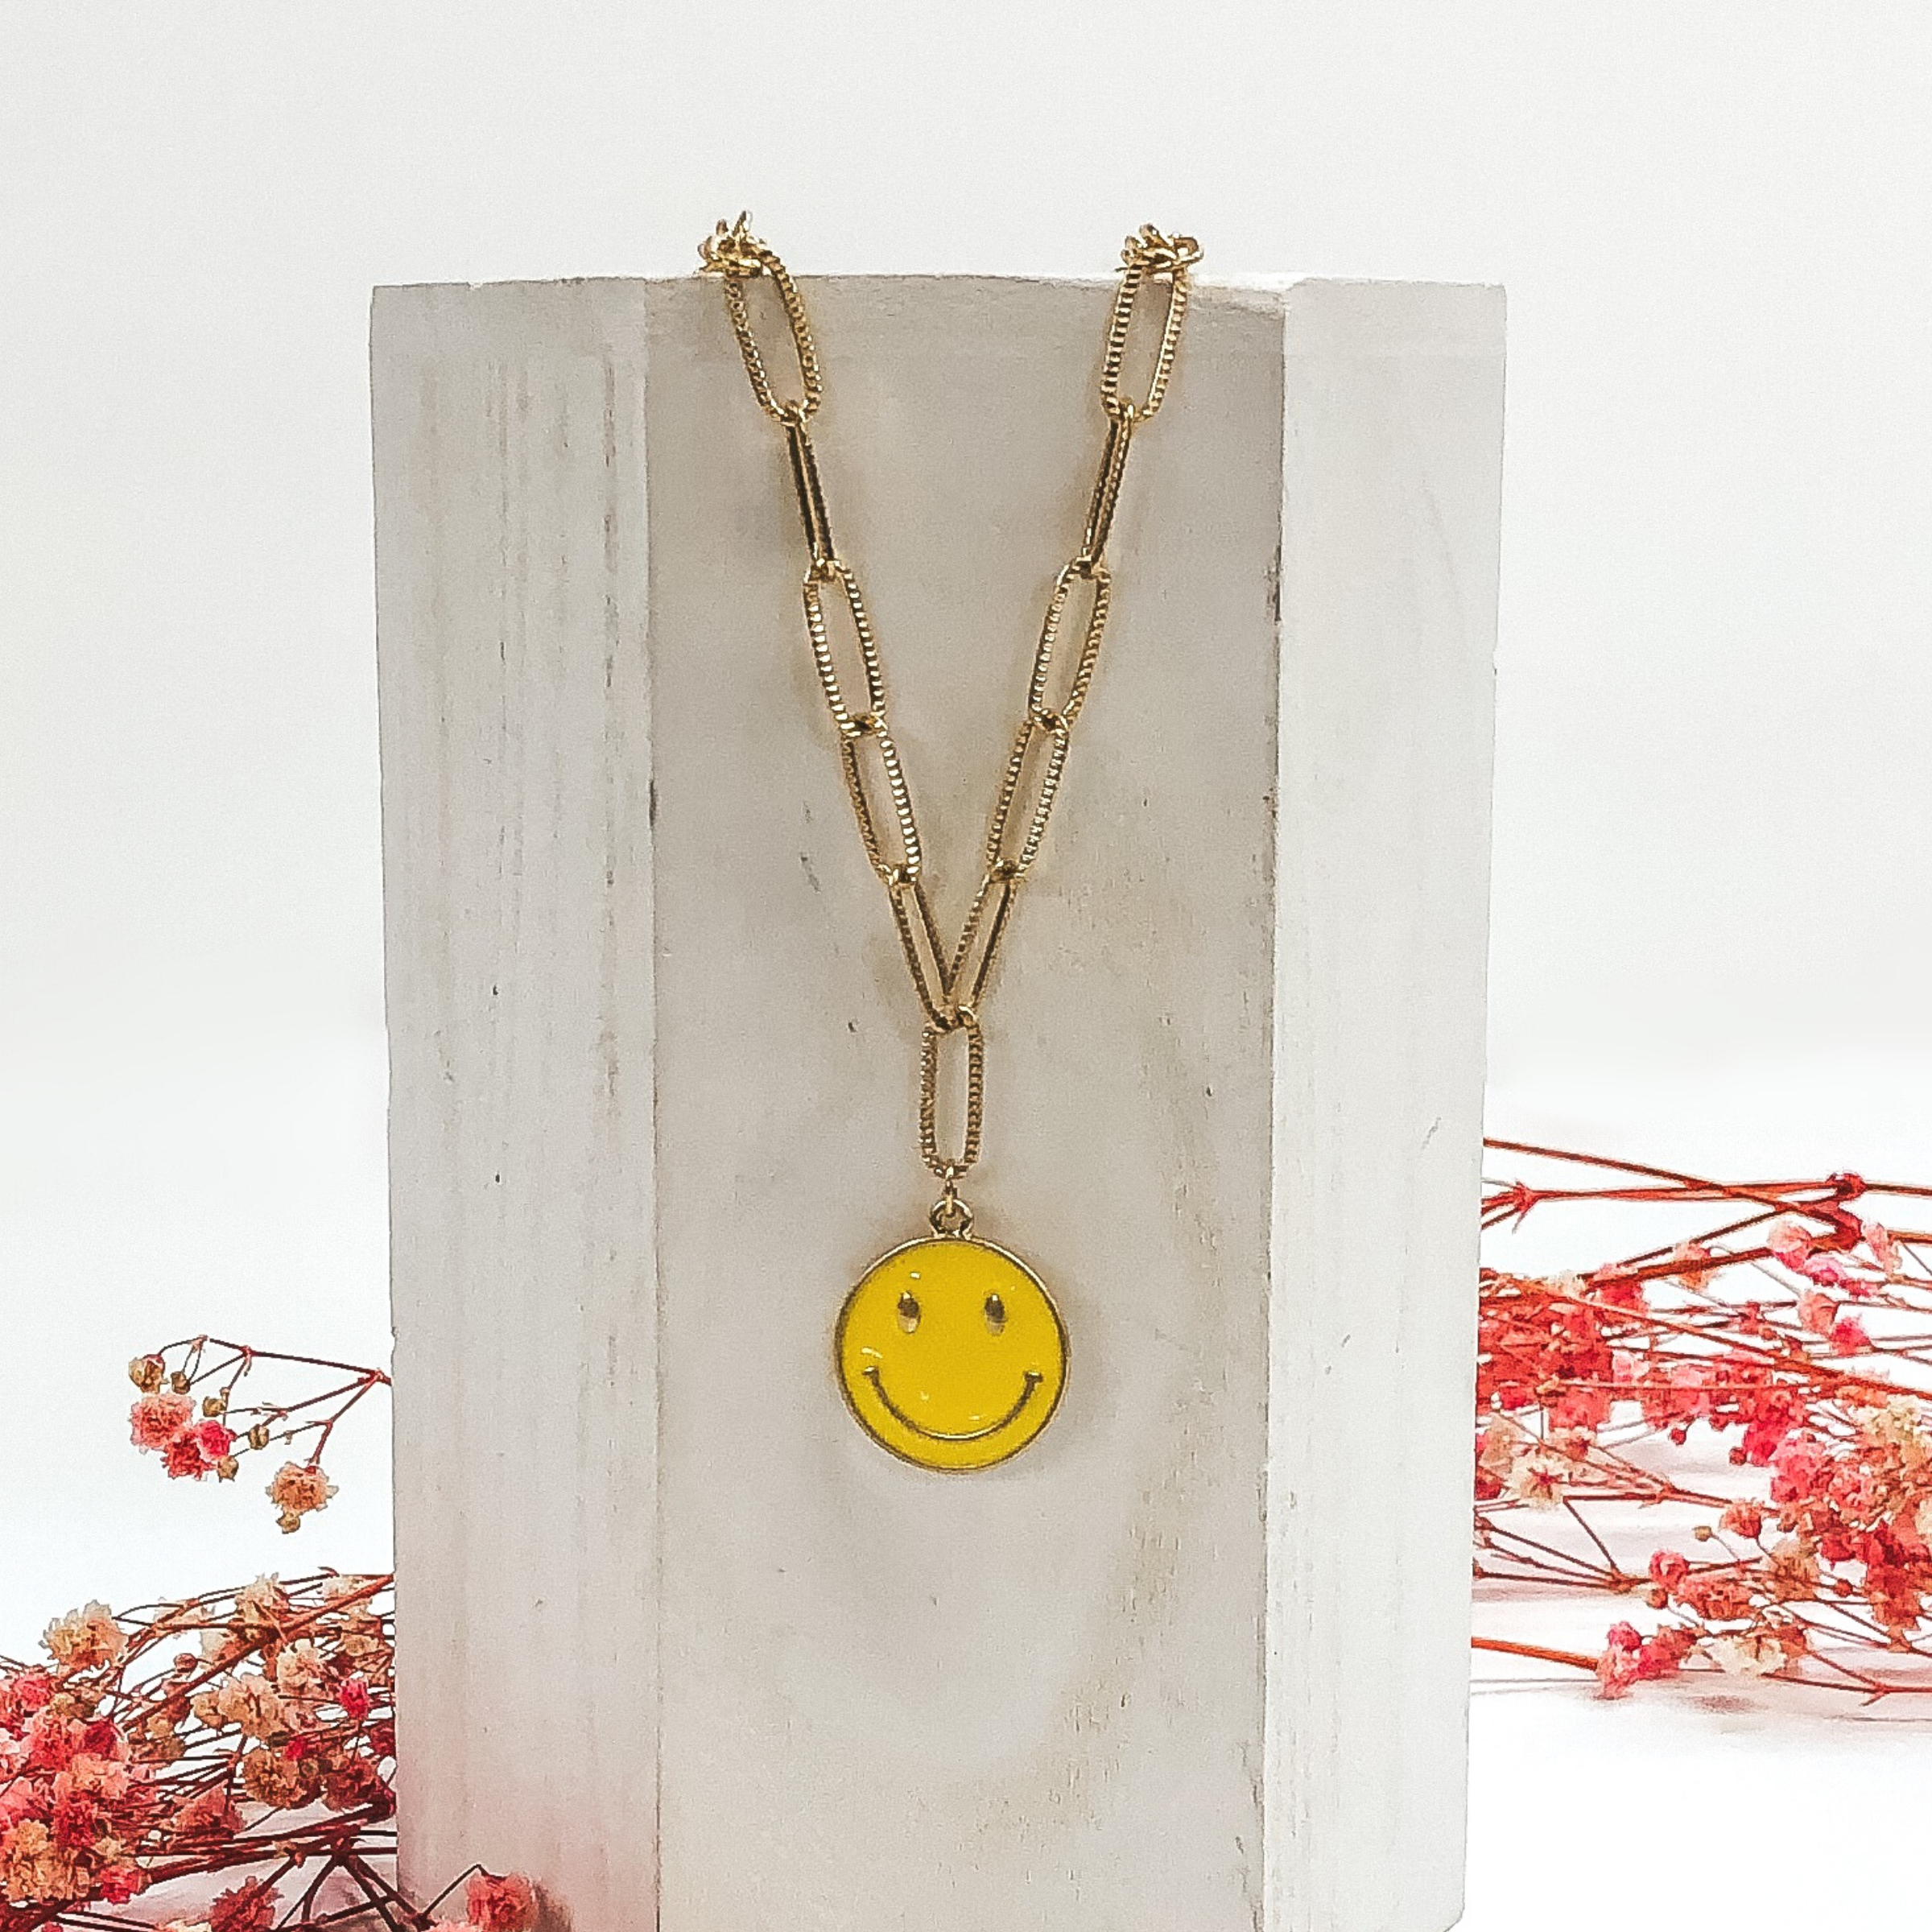 gold necklace with yellow smiley face